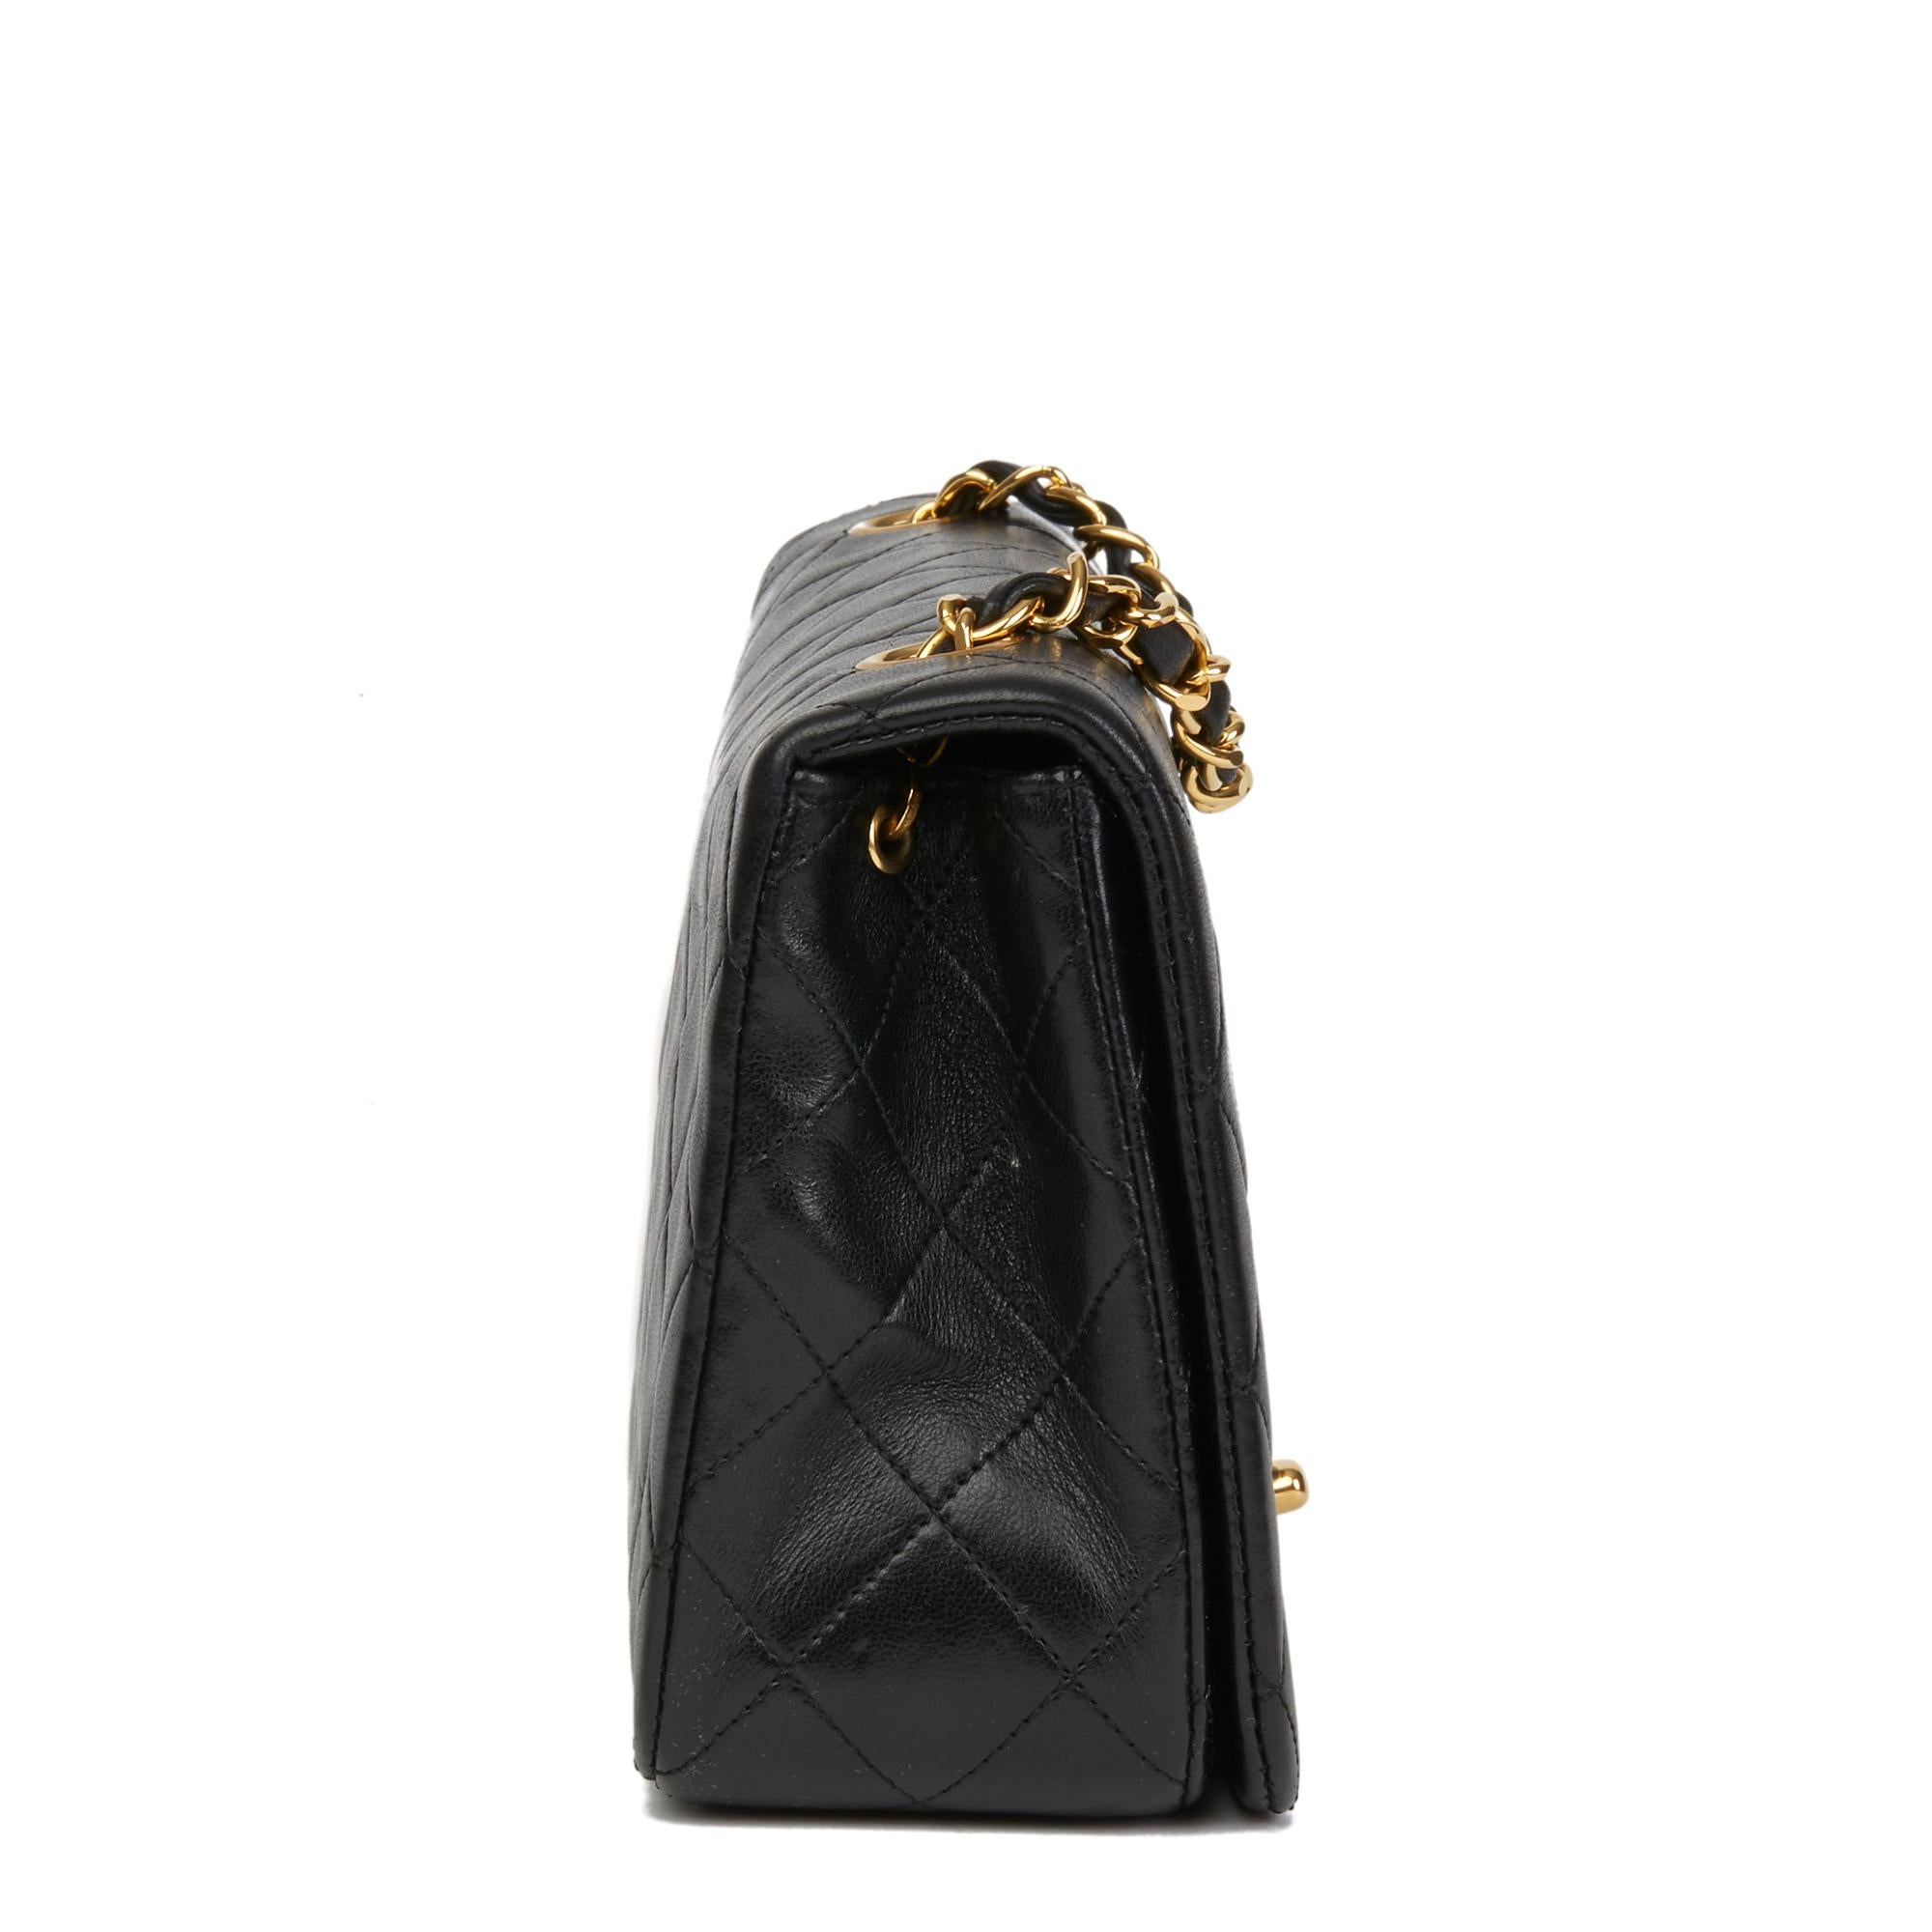 CHANEL
Black Quilted Lambskin Vintage Small Classic Single Full Flap Bag

Reference: HB2697
Serial Number: 1470296
Age (Circa): 1990
Accompanied By: Chanel Dust Bag, Box, Authenticity Card
Authenticity Details: Serial Sticker, Authenticity Card